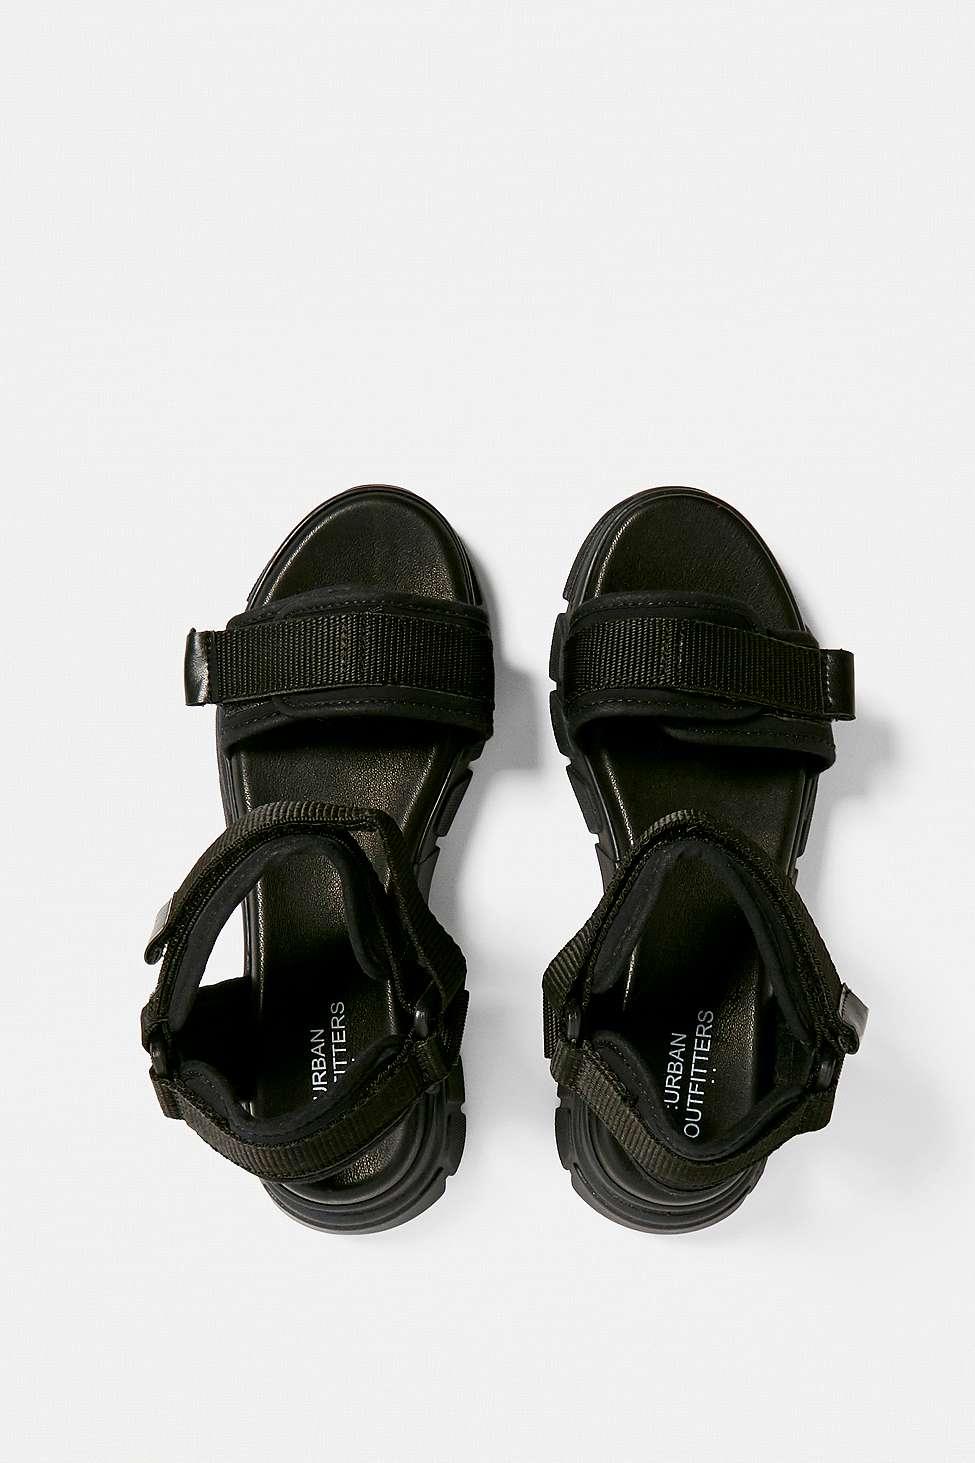 Urban Outfitters Uo Ace Sport Sandals 